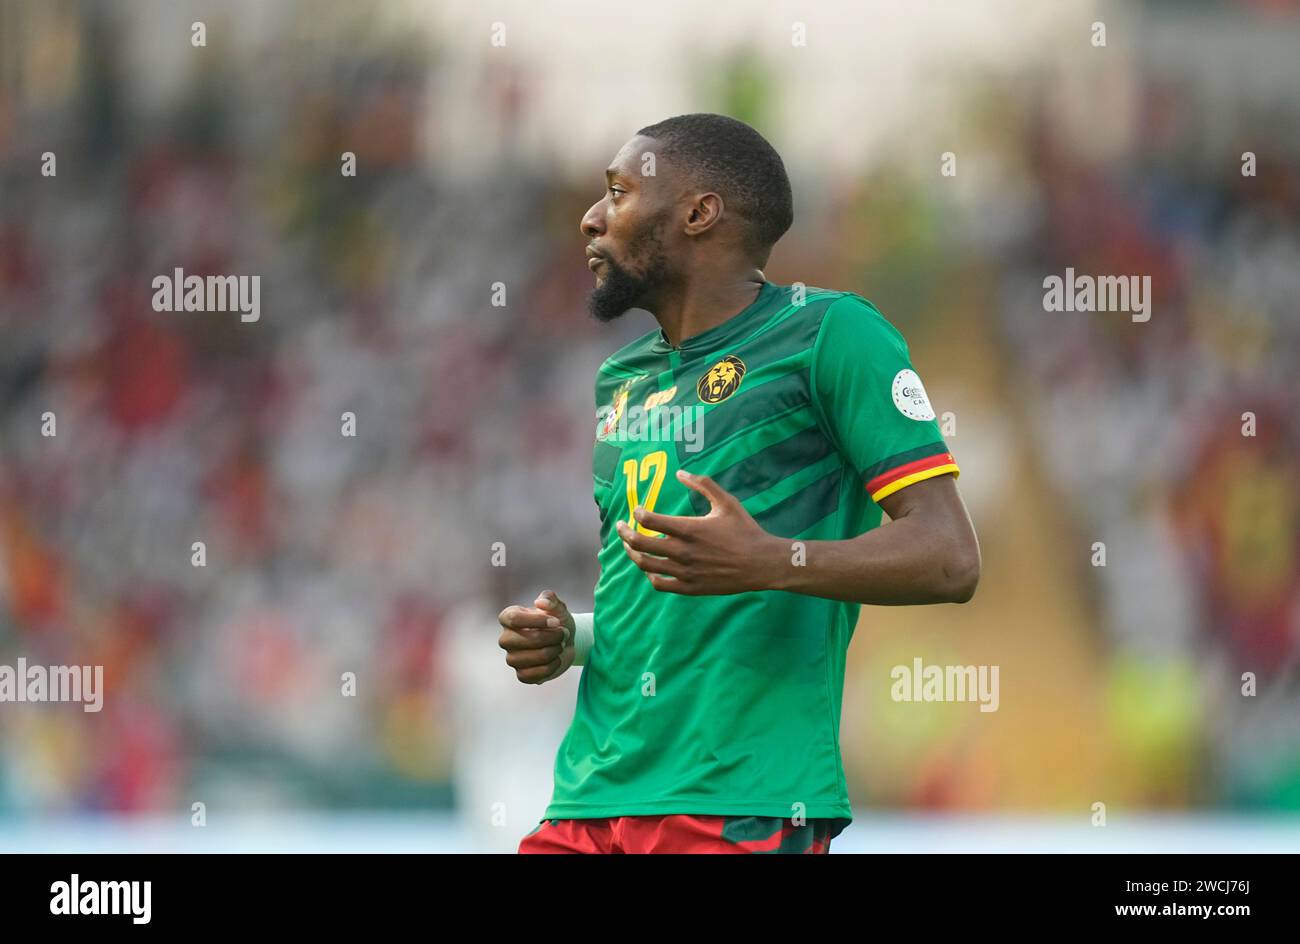 January 15 2024: Karl Brillant Toko Ekambi (Cameroon) looks on during a African Cup of Nations Group C game, Cameroon vs Guinea, at Stade Charles Konan Banny, Yamoussoukro, Ivory Coast. Kim Price/CSM Stock Photo